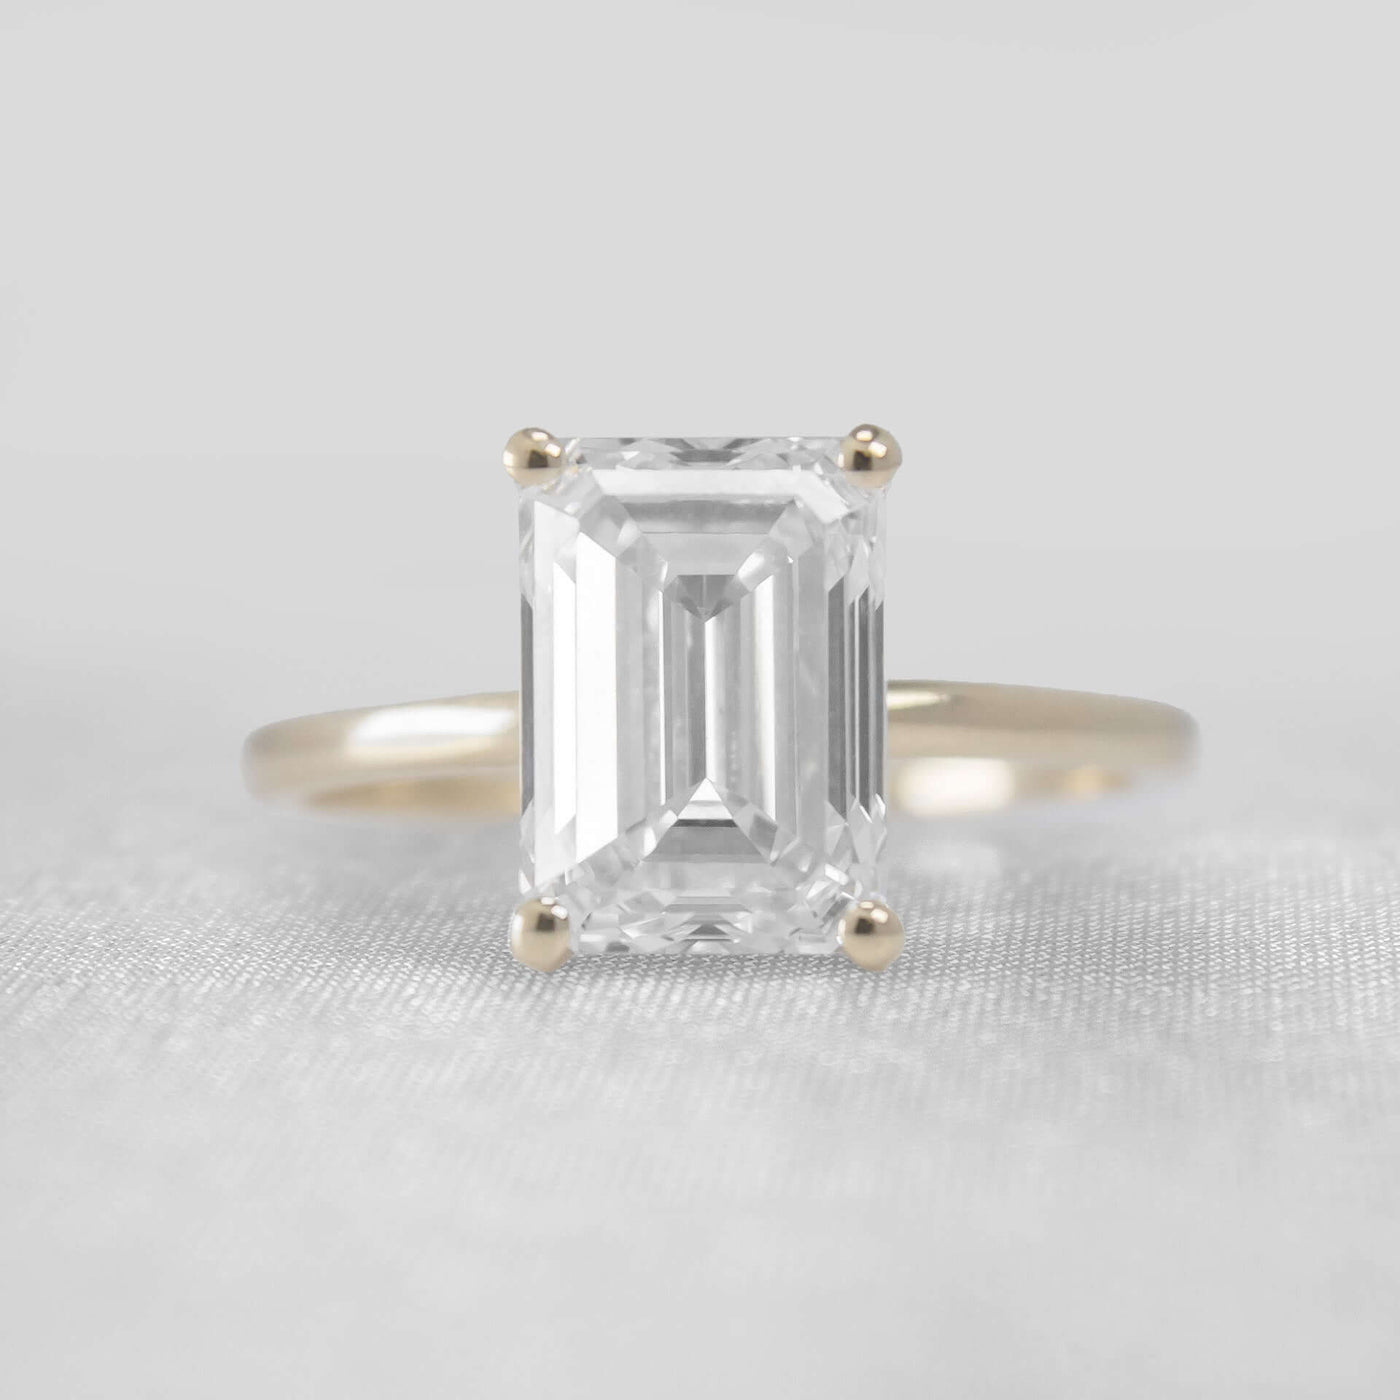 Shown in 4.0 Carat * The Olivia Diamond Solitaire Ring - Lisa Robin#shape_emerald